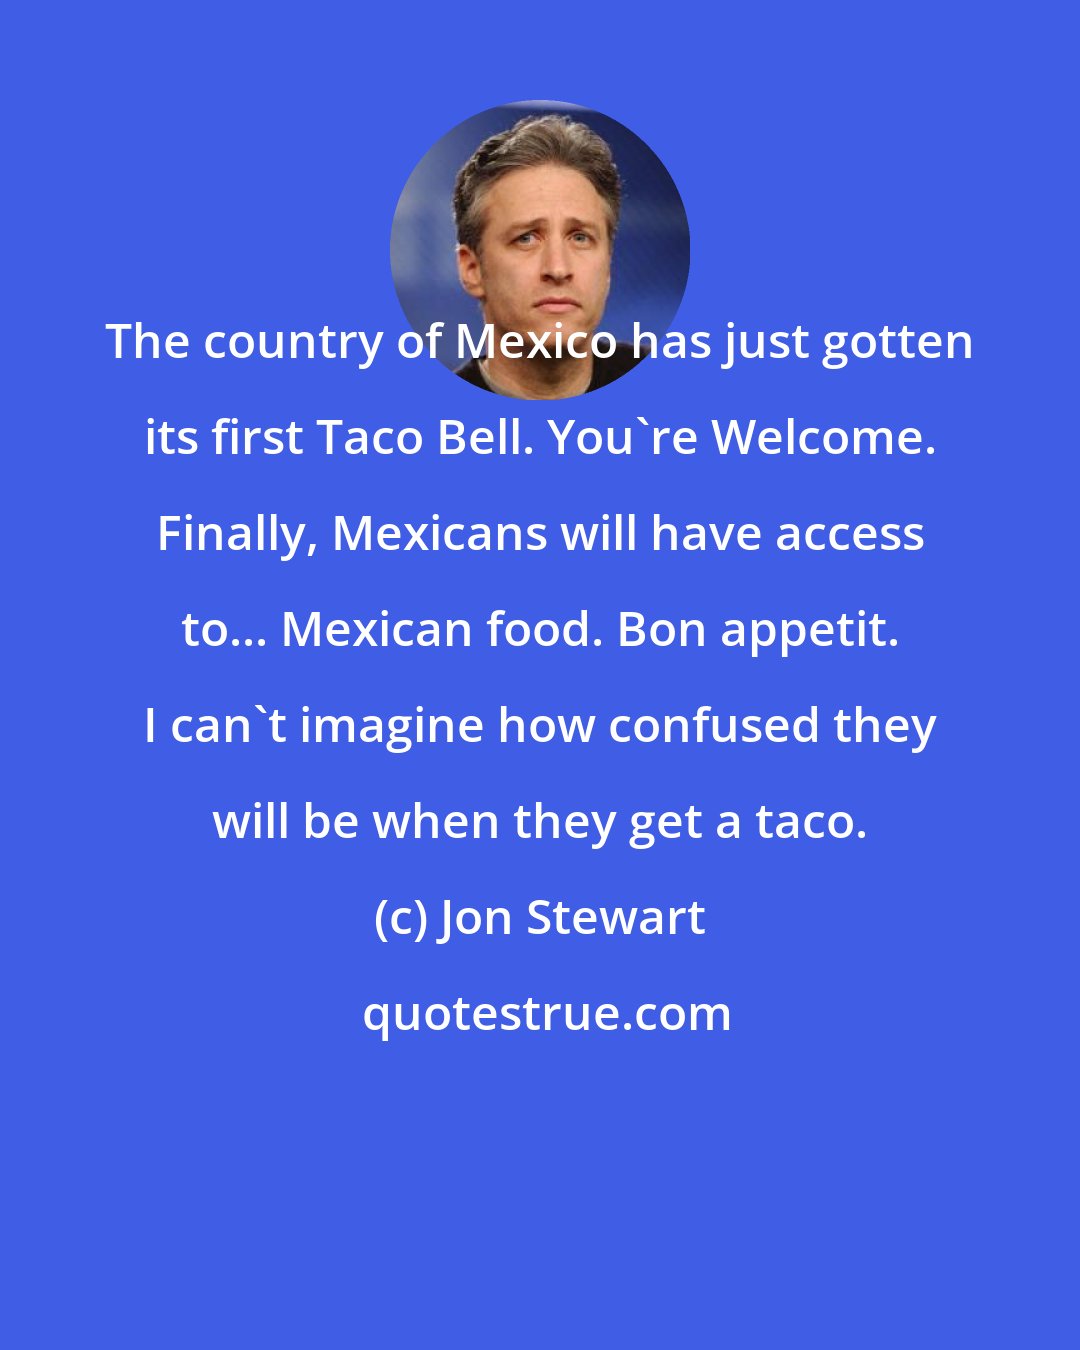 Jon Stewart: The country of Mexico has just gotten its first Taco Bell. You're Welcome. Finally, Mexicans will have access to... Mexican food. Bon appetit. I can't imagine how confused they will be when they get a taco.